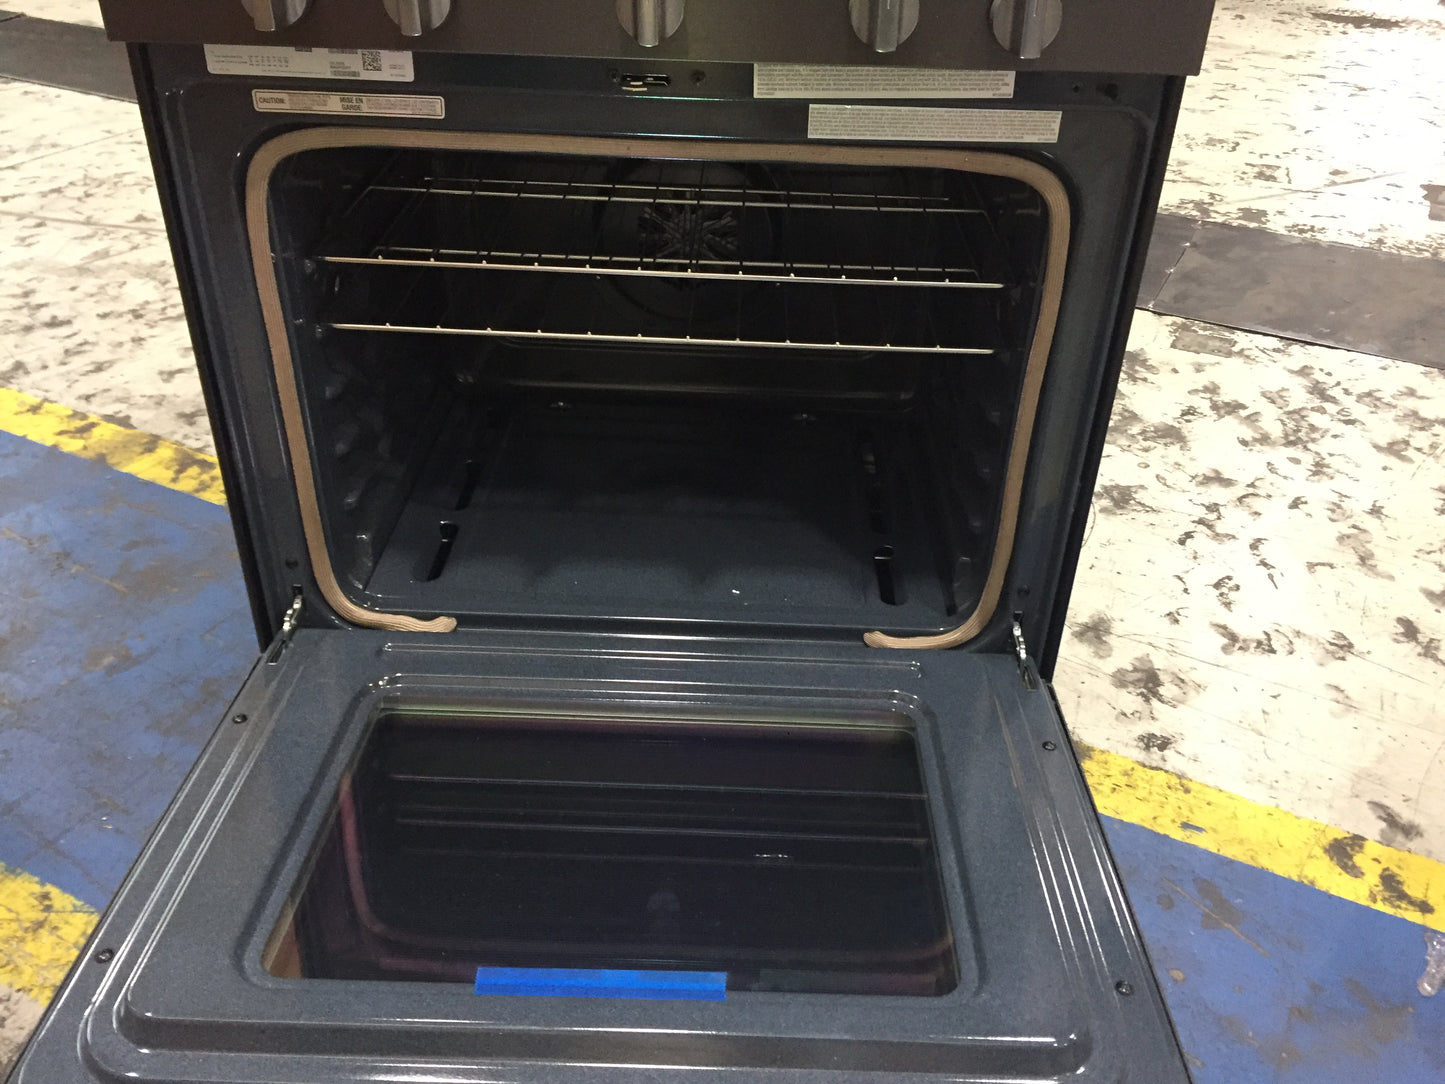 5.0 CU. FT. WHIRLPOOL GAS CONVECTION OVEN WITH FROZEN BAKE TECHNOLOGY; 115V, BLACK STAINLESS, 